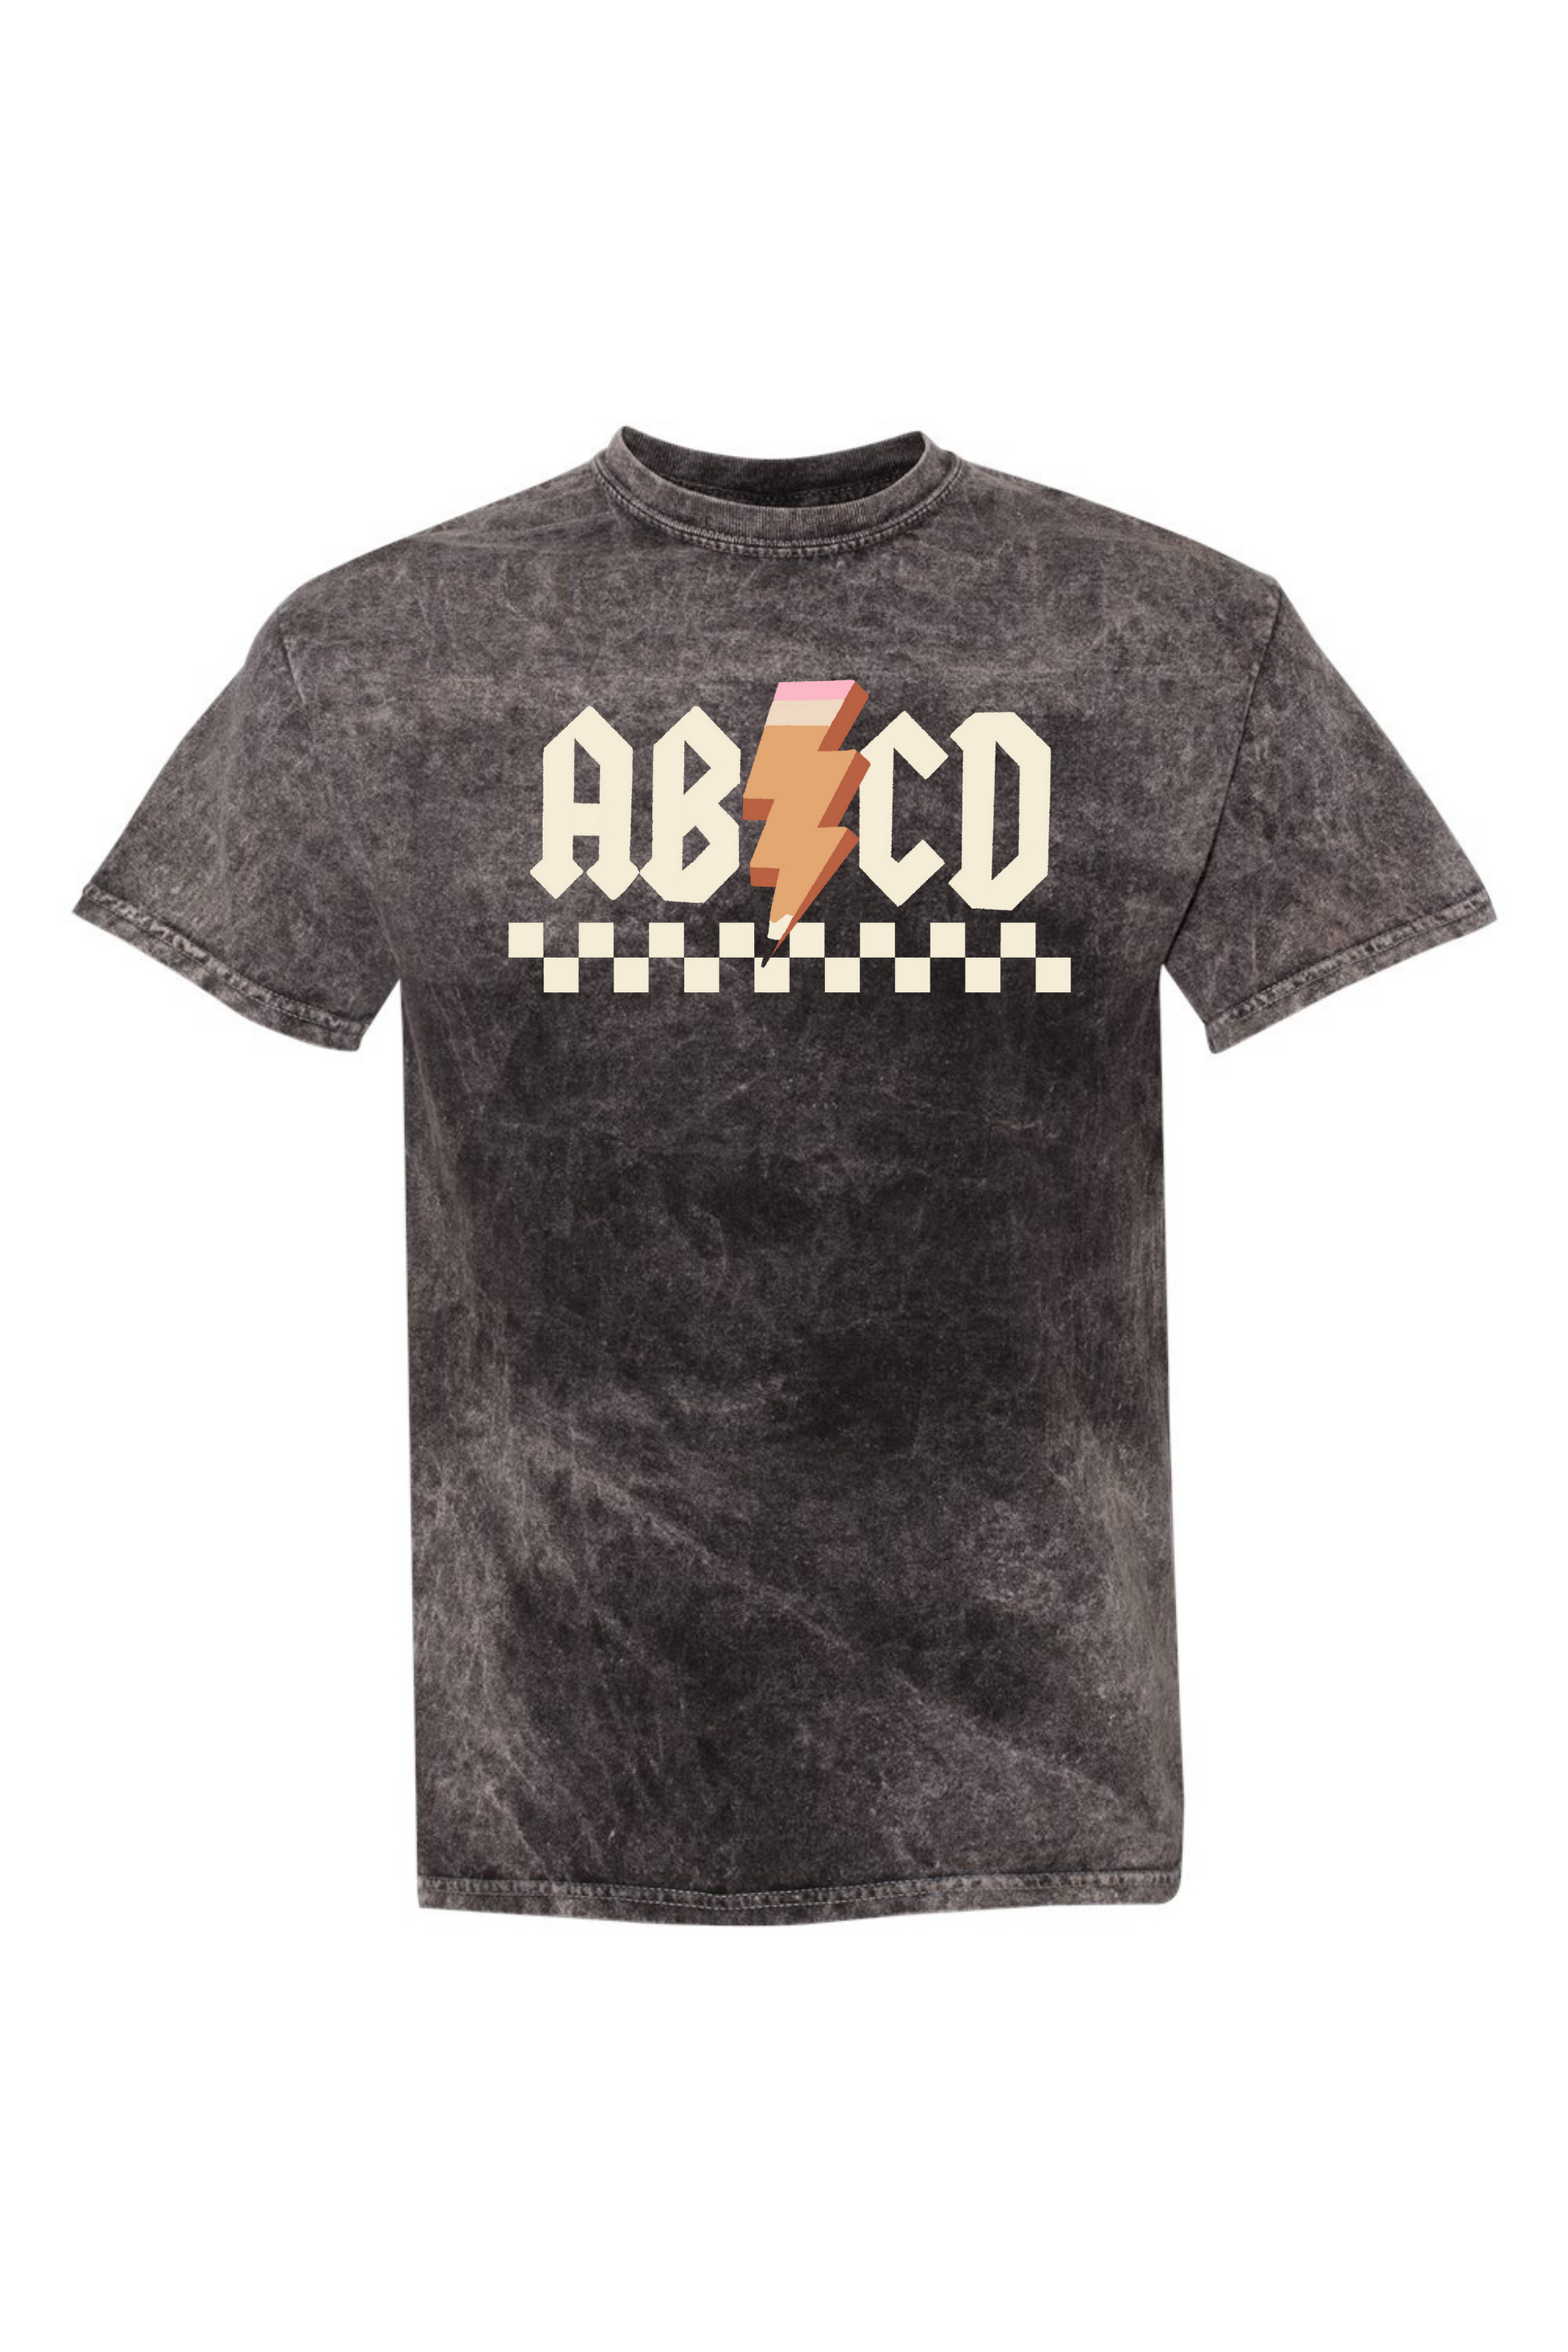 AB⚡CD | Mineral Wash Kids Tee-Kids Tees-Sister Shirts-Sister Shirts, Cute & Custom Tees for Mama & Littles in Trussville, Alabama.